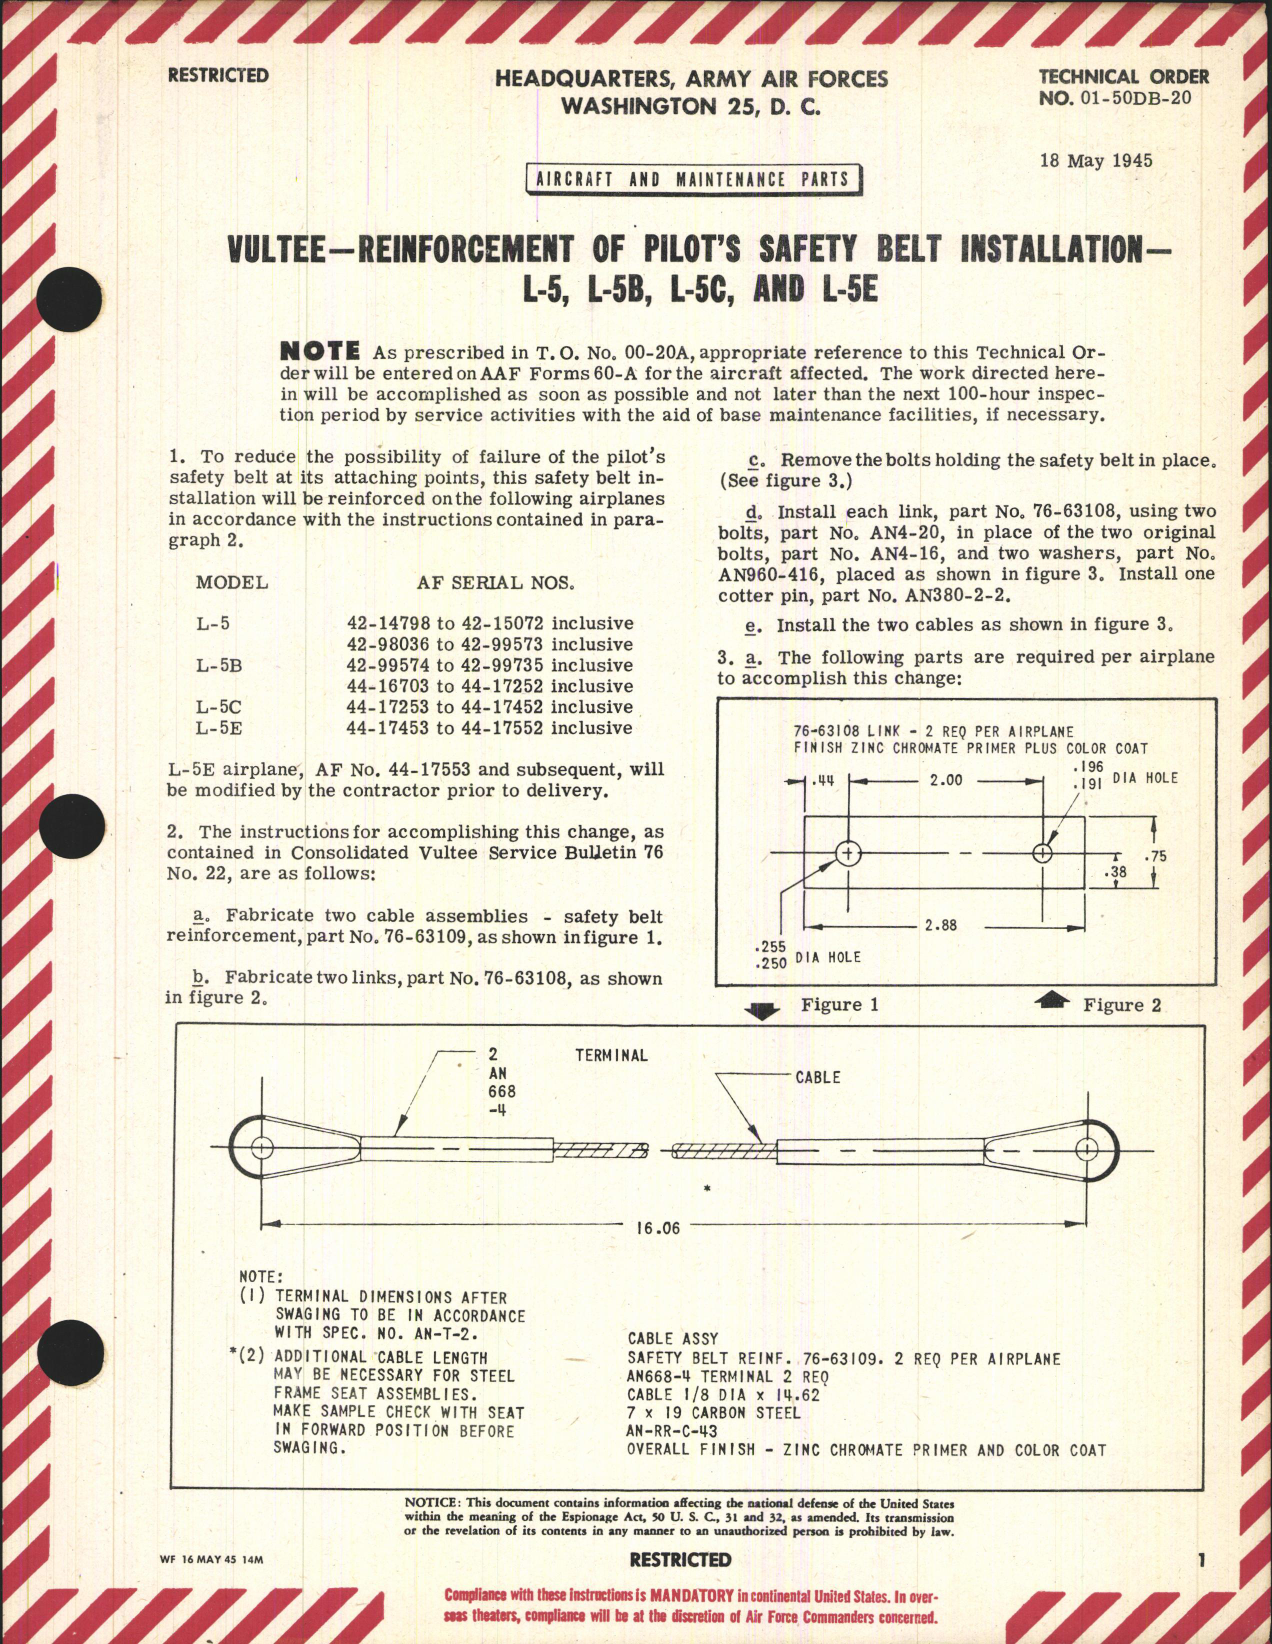 Sample page 1 from AirCorps Library document: Reinforcement of Pilot's Safety Belt Installation for L-5, L-5B, L-5C, and L-5E